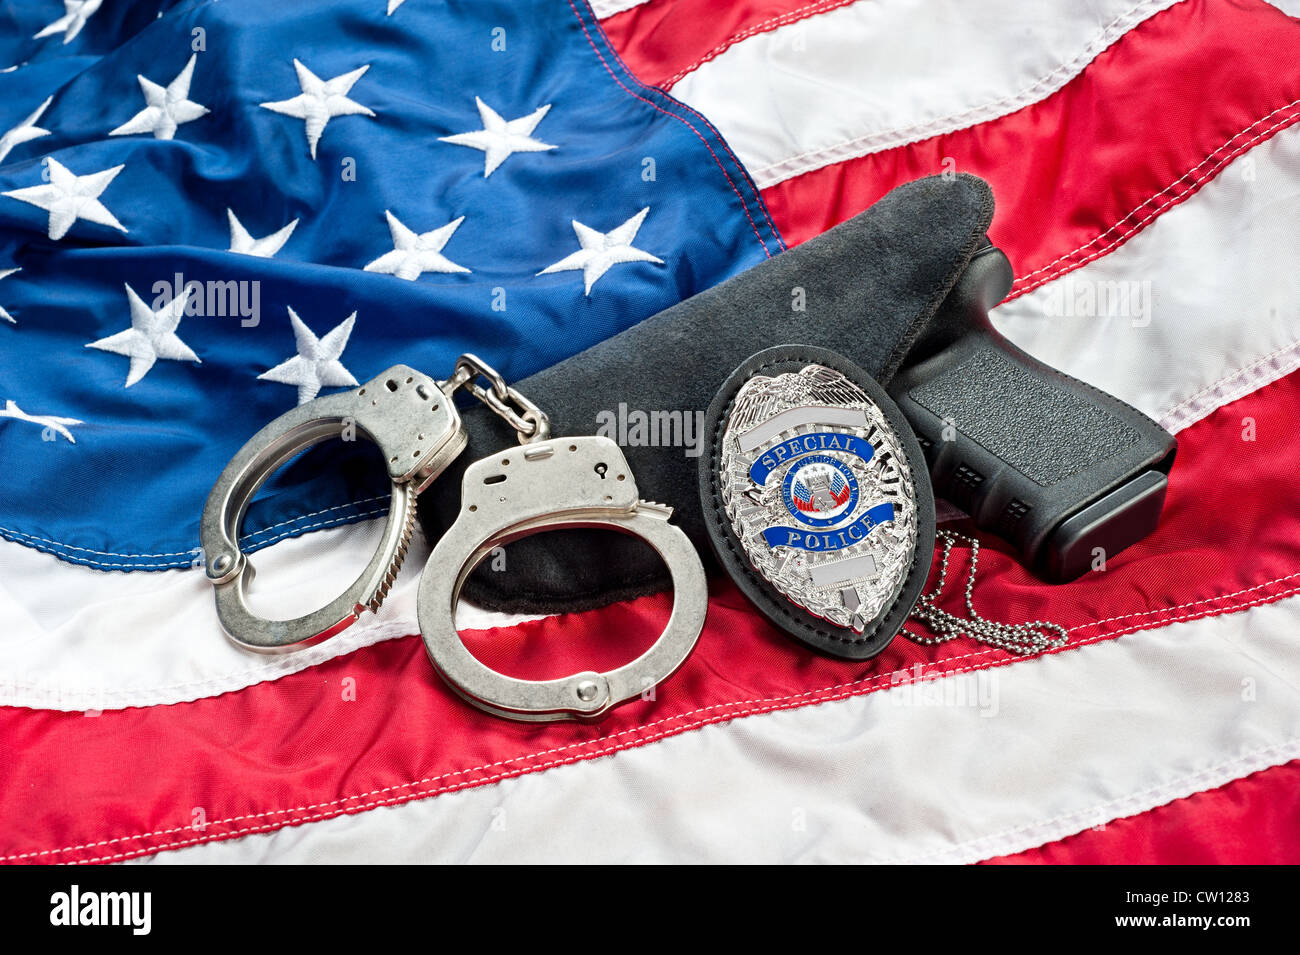 Police badge, gun and handcuffs on an American flag symbolizing law enforcement in the United States. Stock Photo